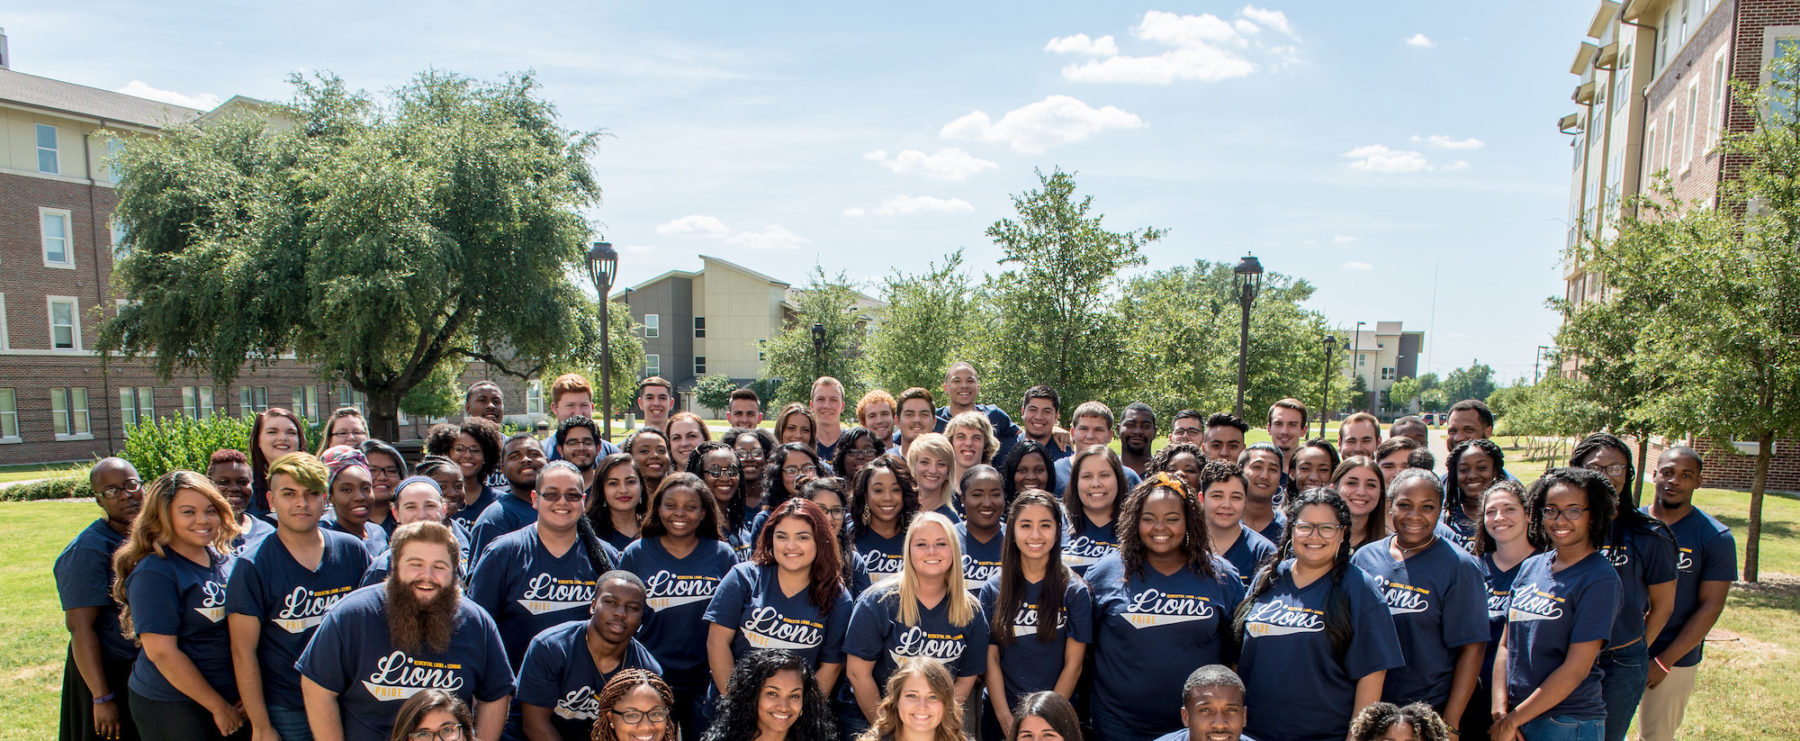 A&M-Commerce Students to Benefit from $100 Million Scholarship Fund